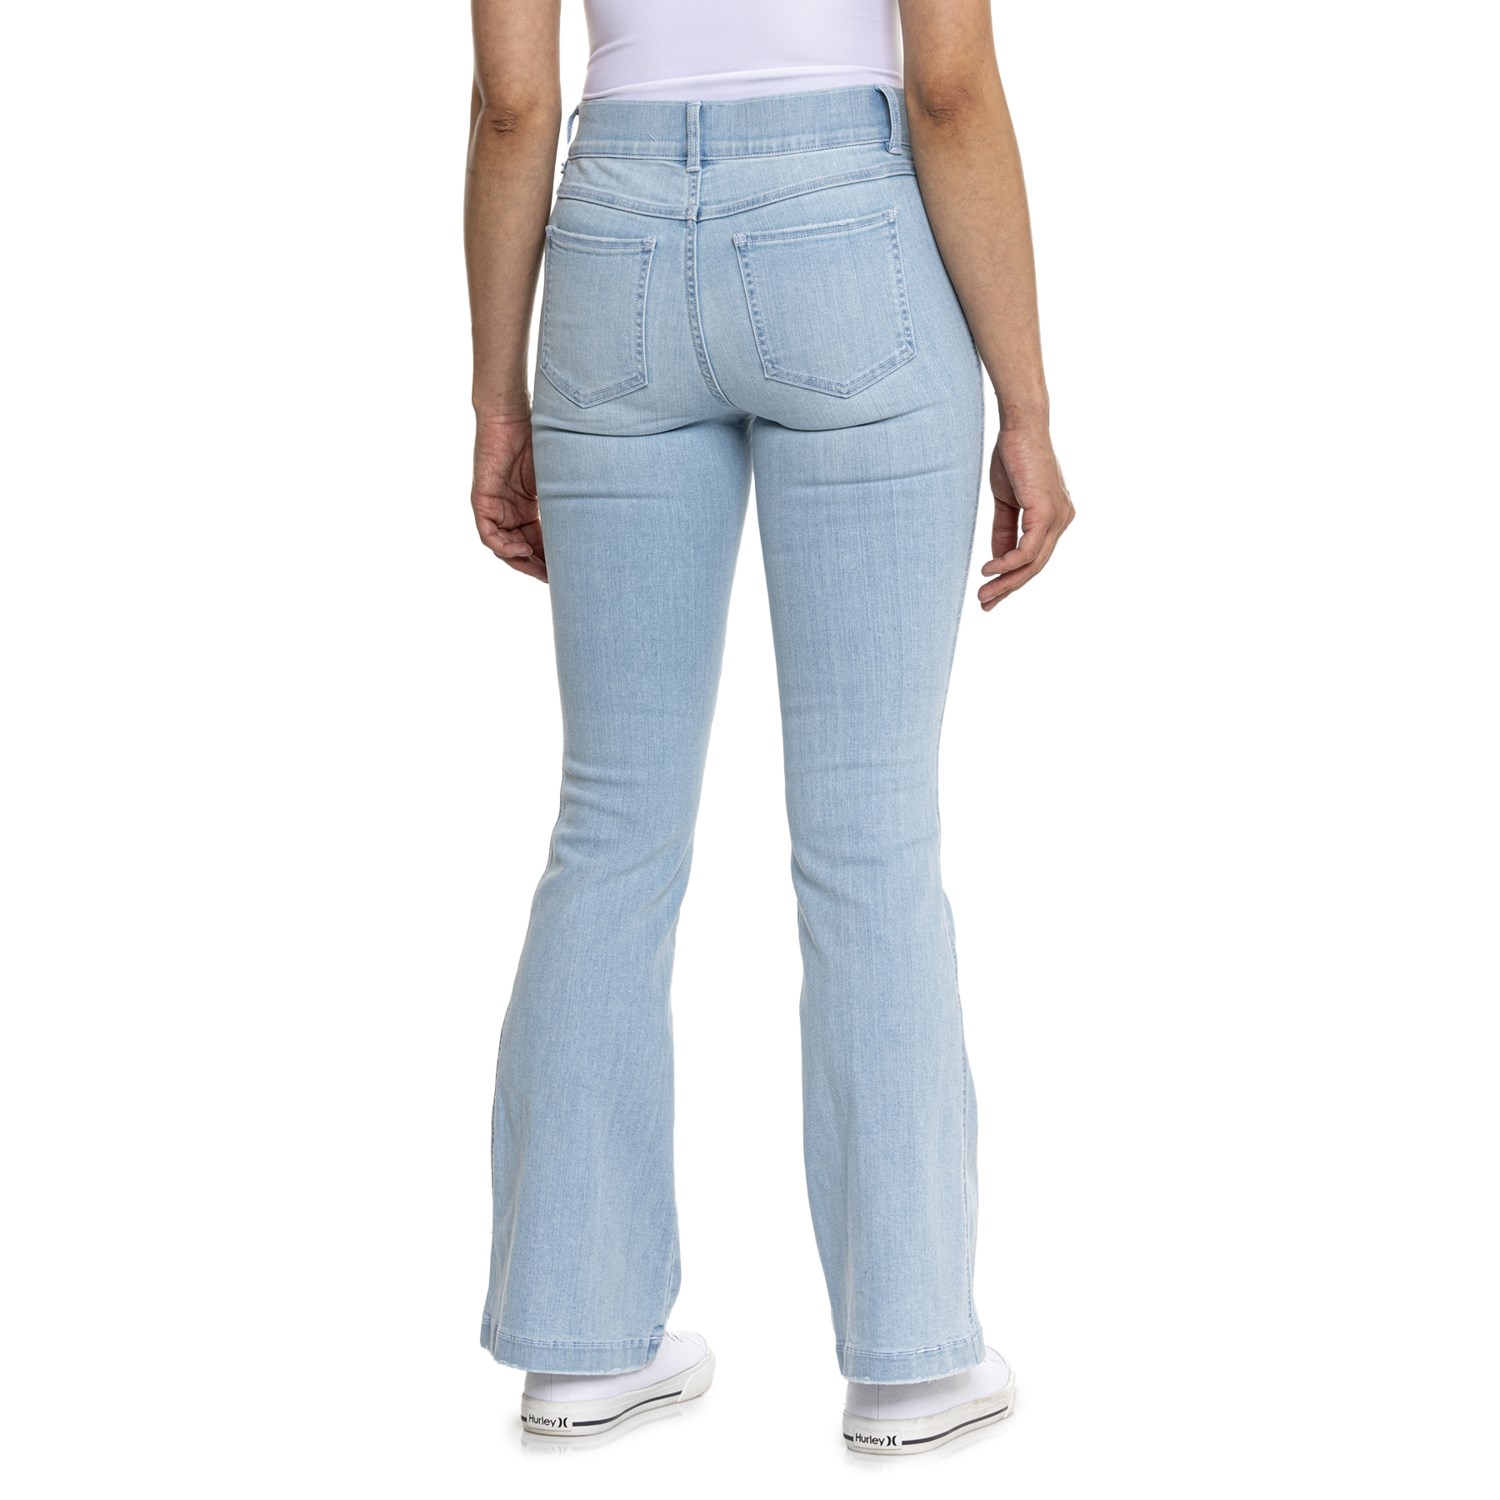 SPANX, Jeans, Spanx Flare Jeans White